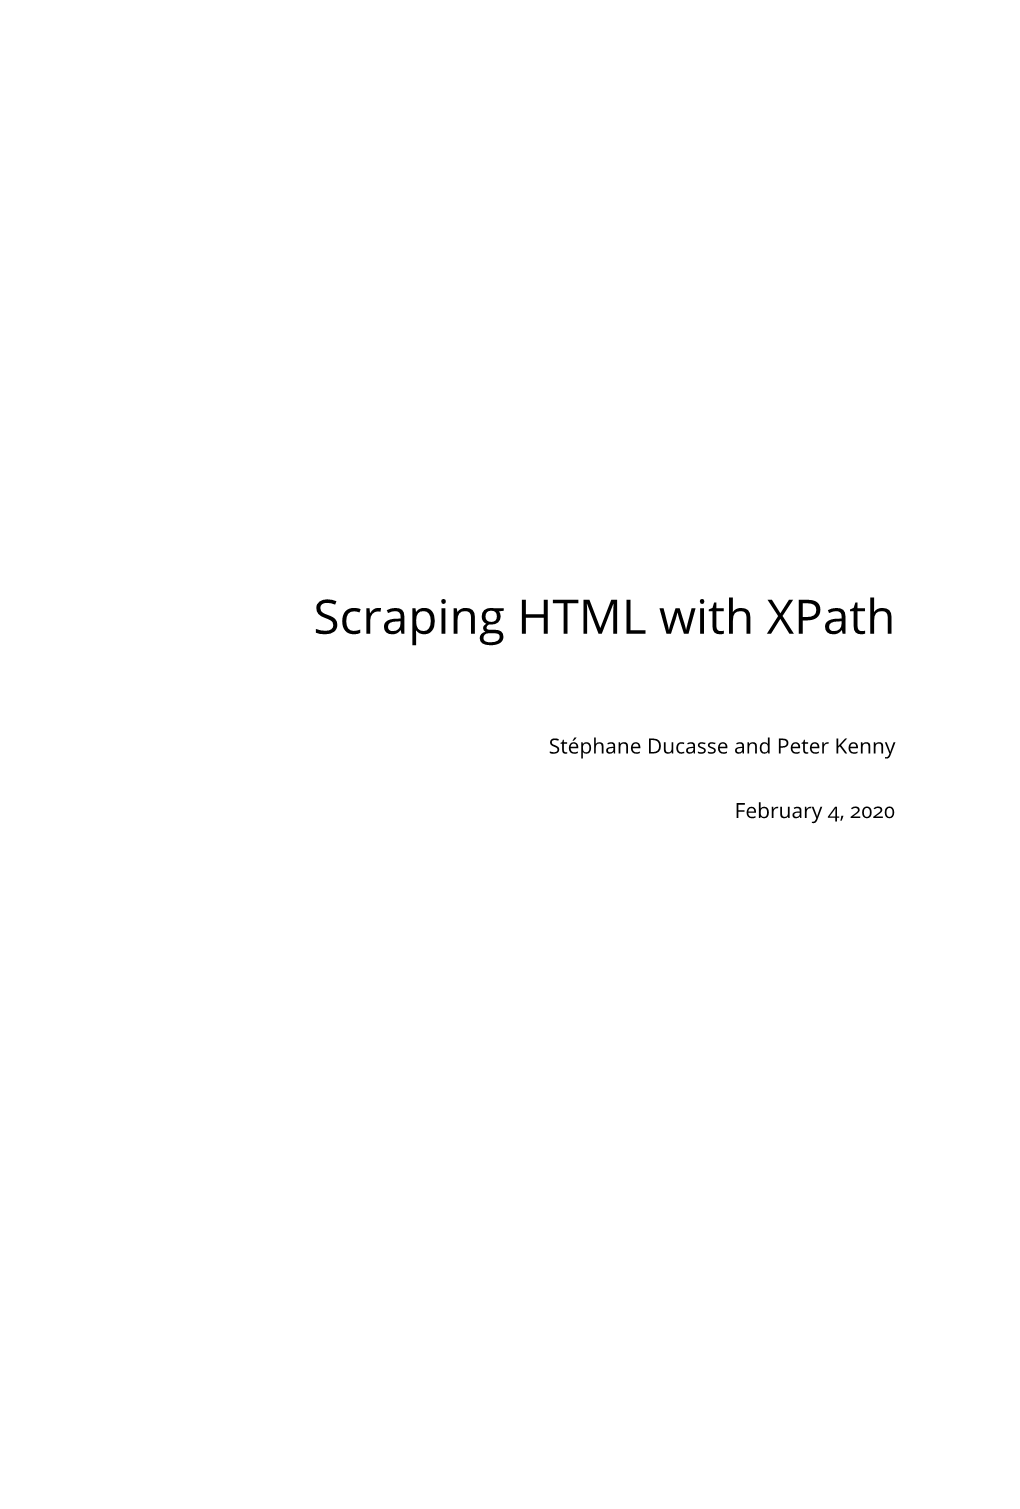 Scraping HTML with Xpath